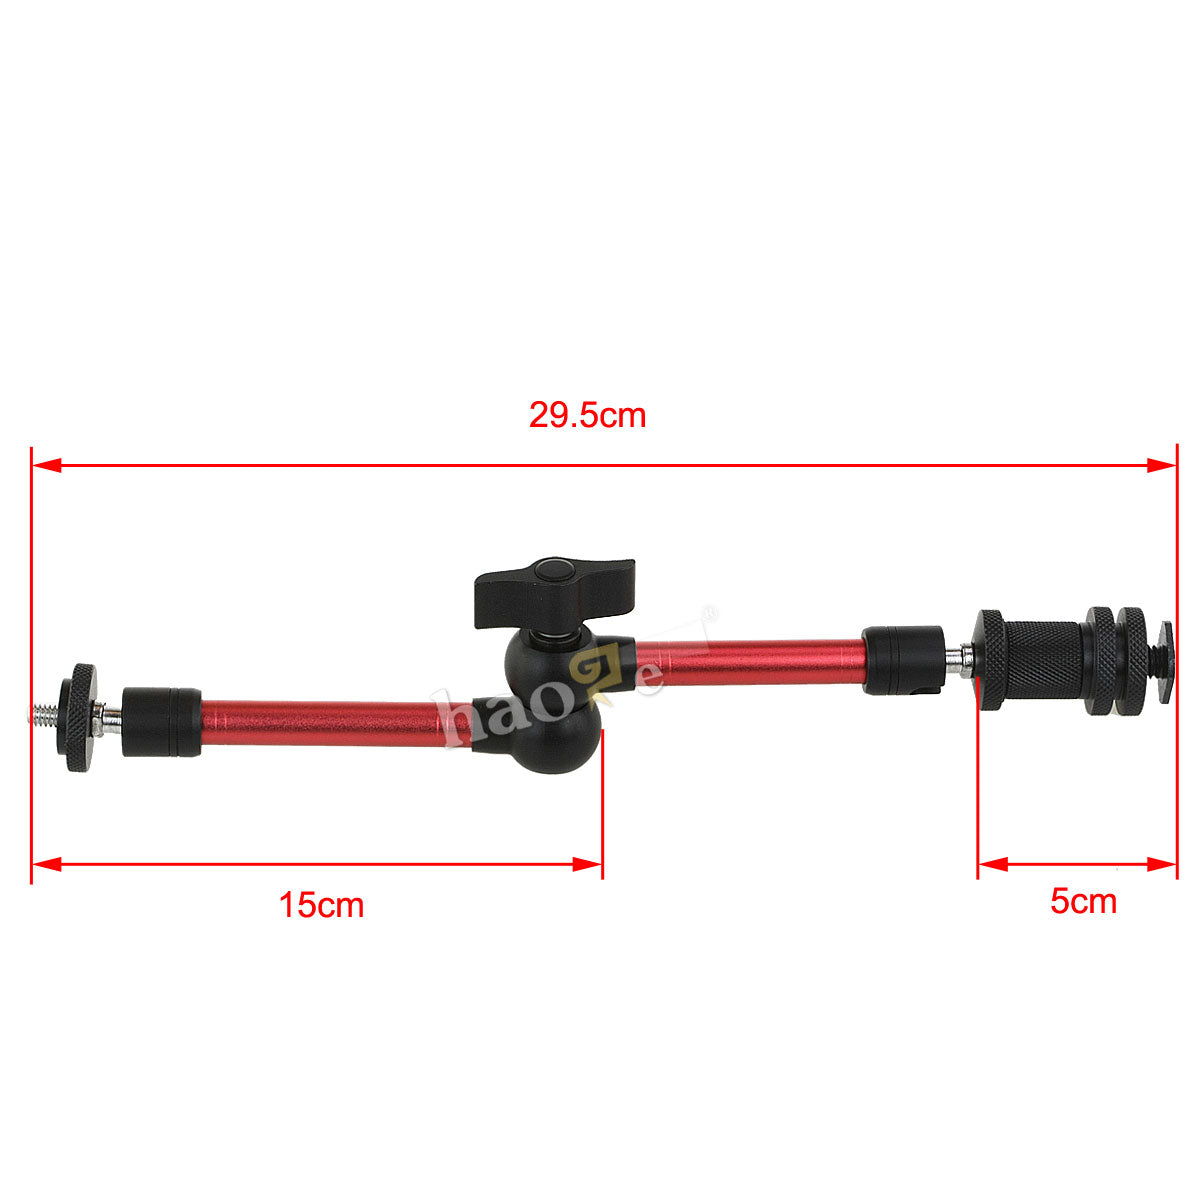 Haoge 11 inch Articulating Friction Magic Arm with Large Clamp Crab Pliers Clip for HDMI LCD Monitor LED Light DSLR Camera Video Tripod Red